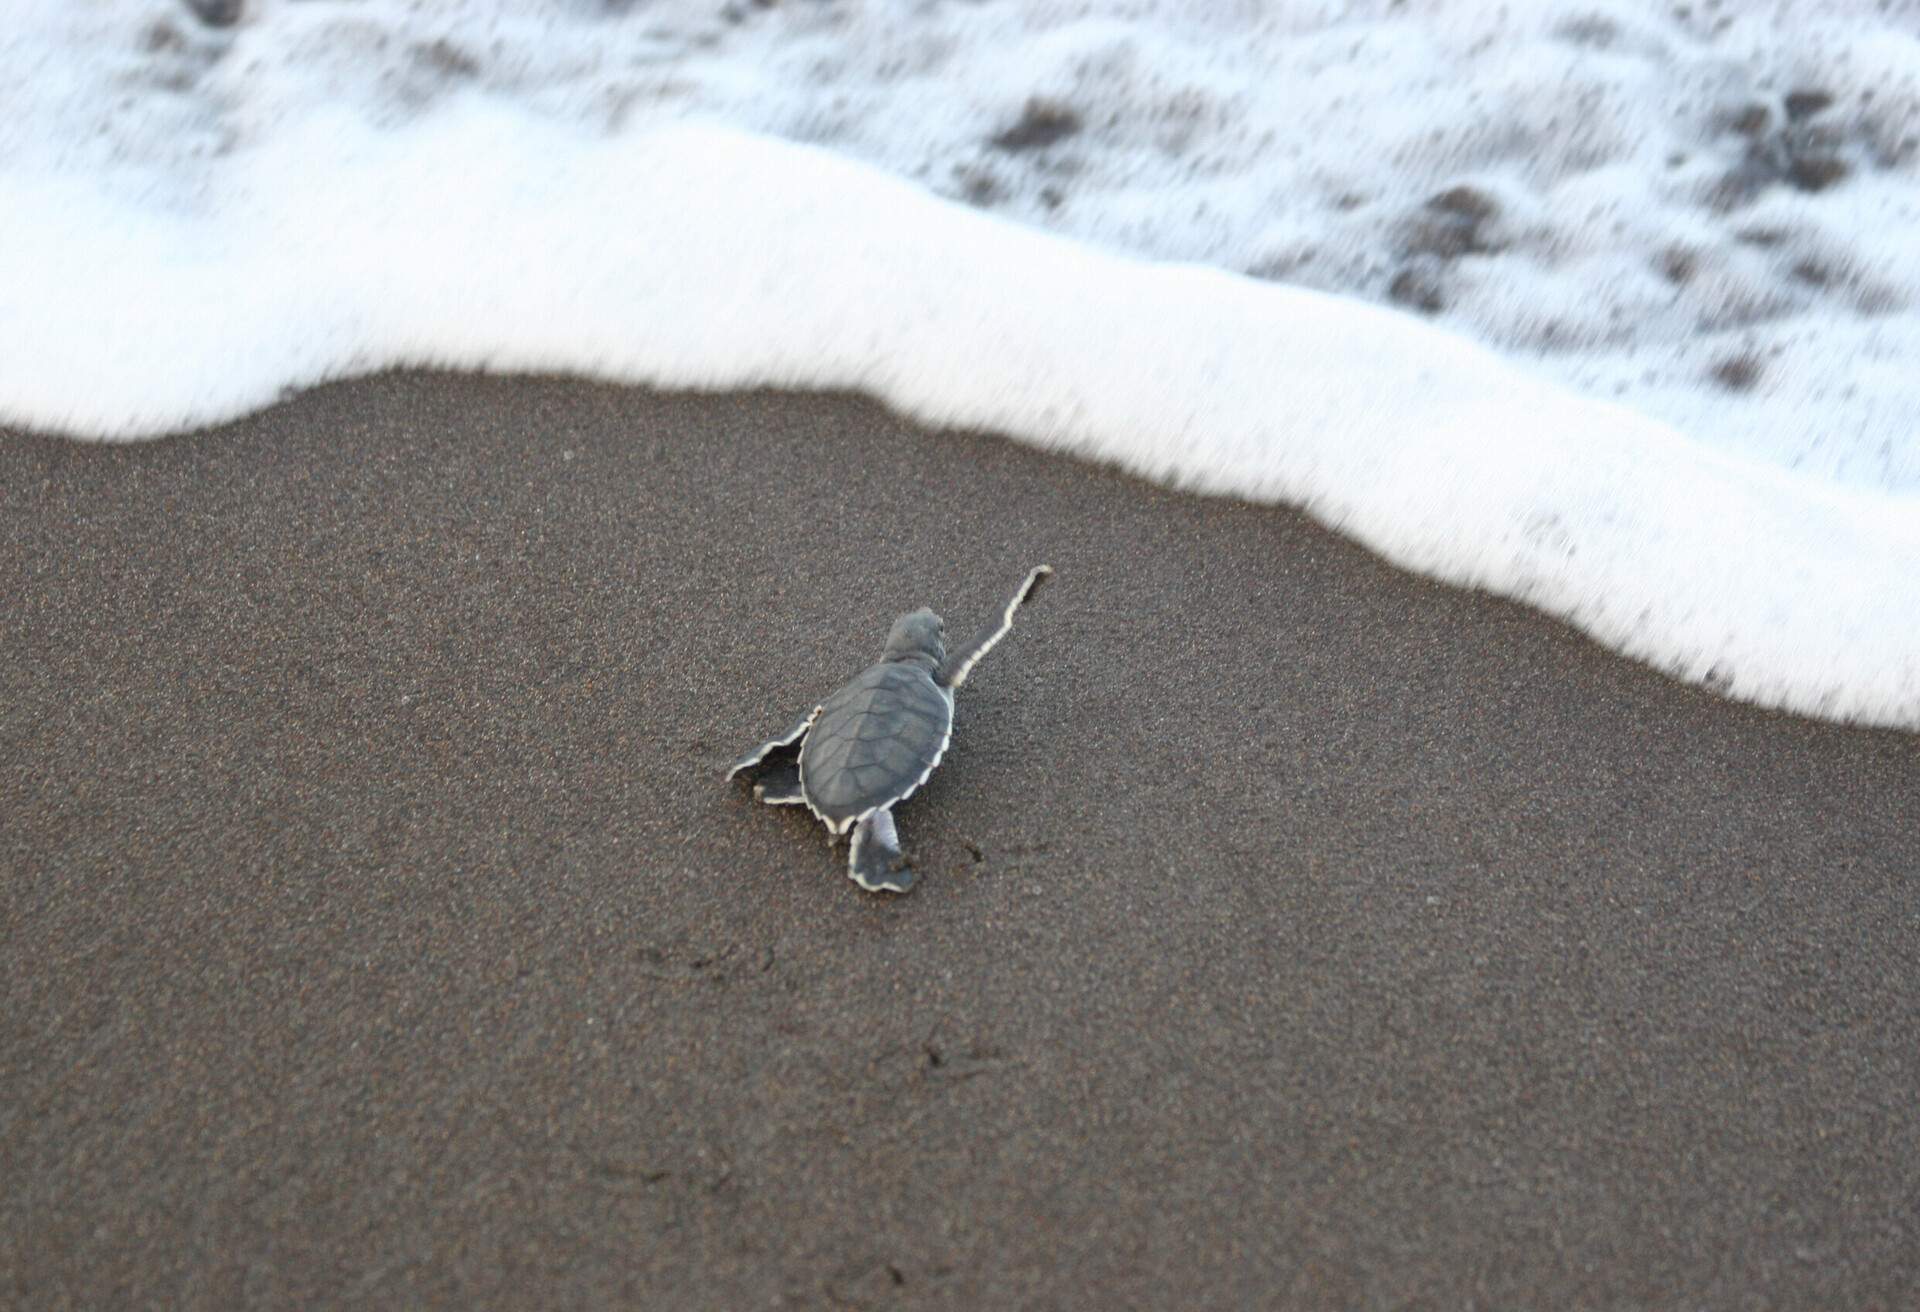 A baby turtle crawls on black sand towards the ocean waves.